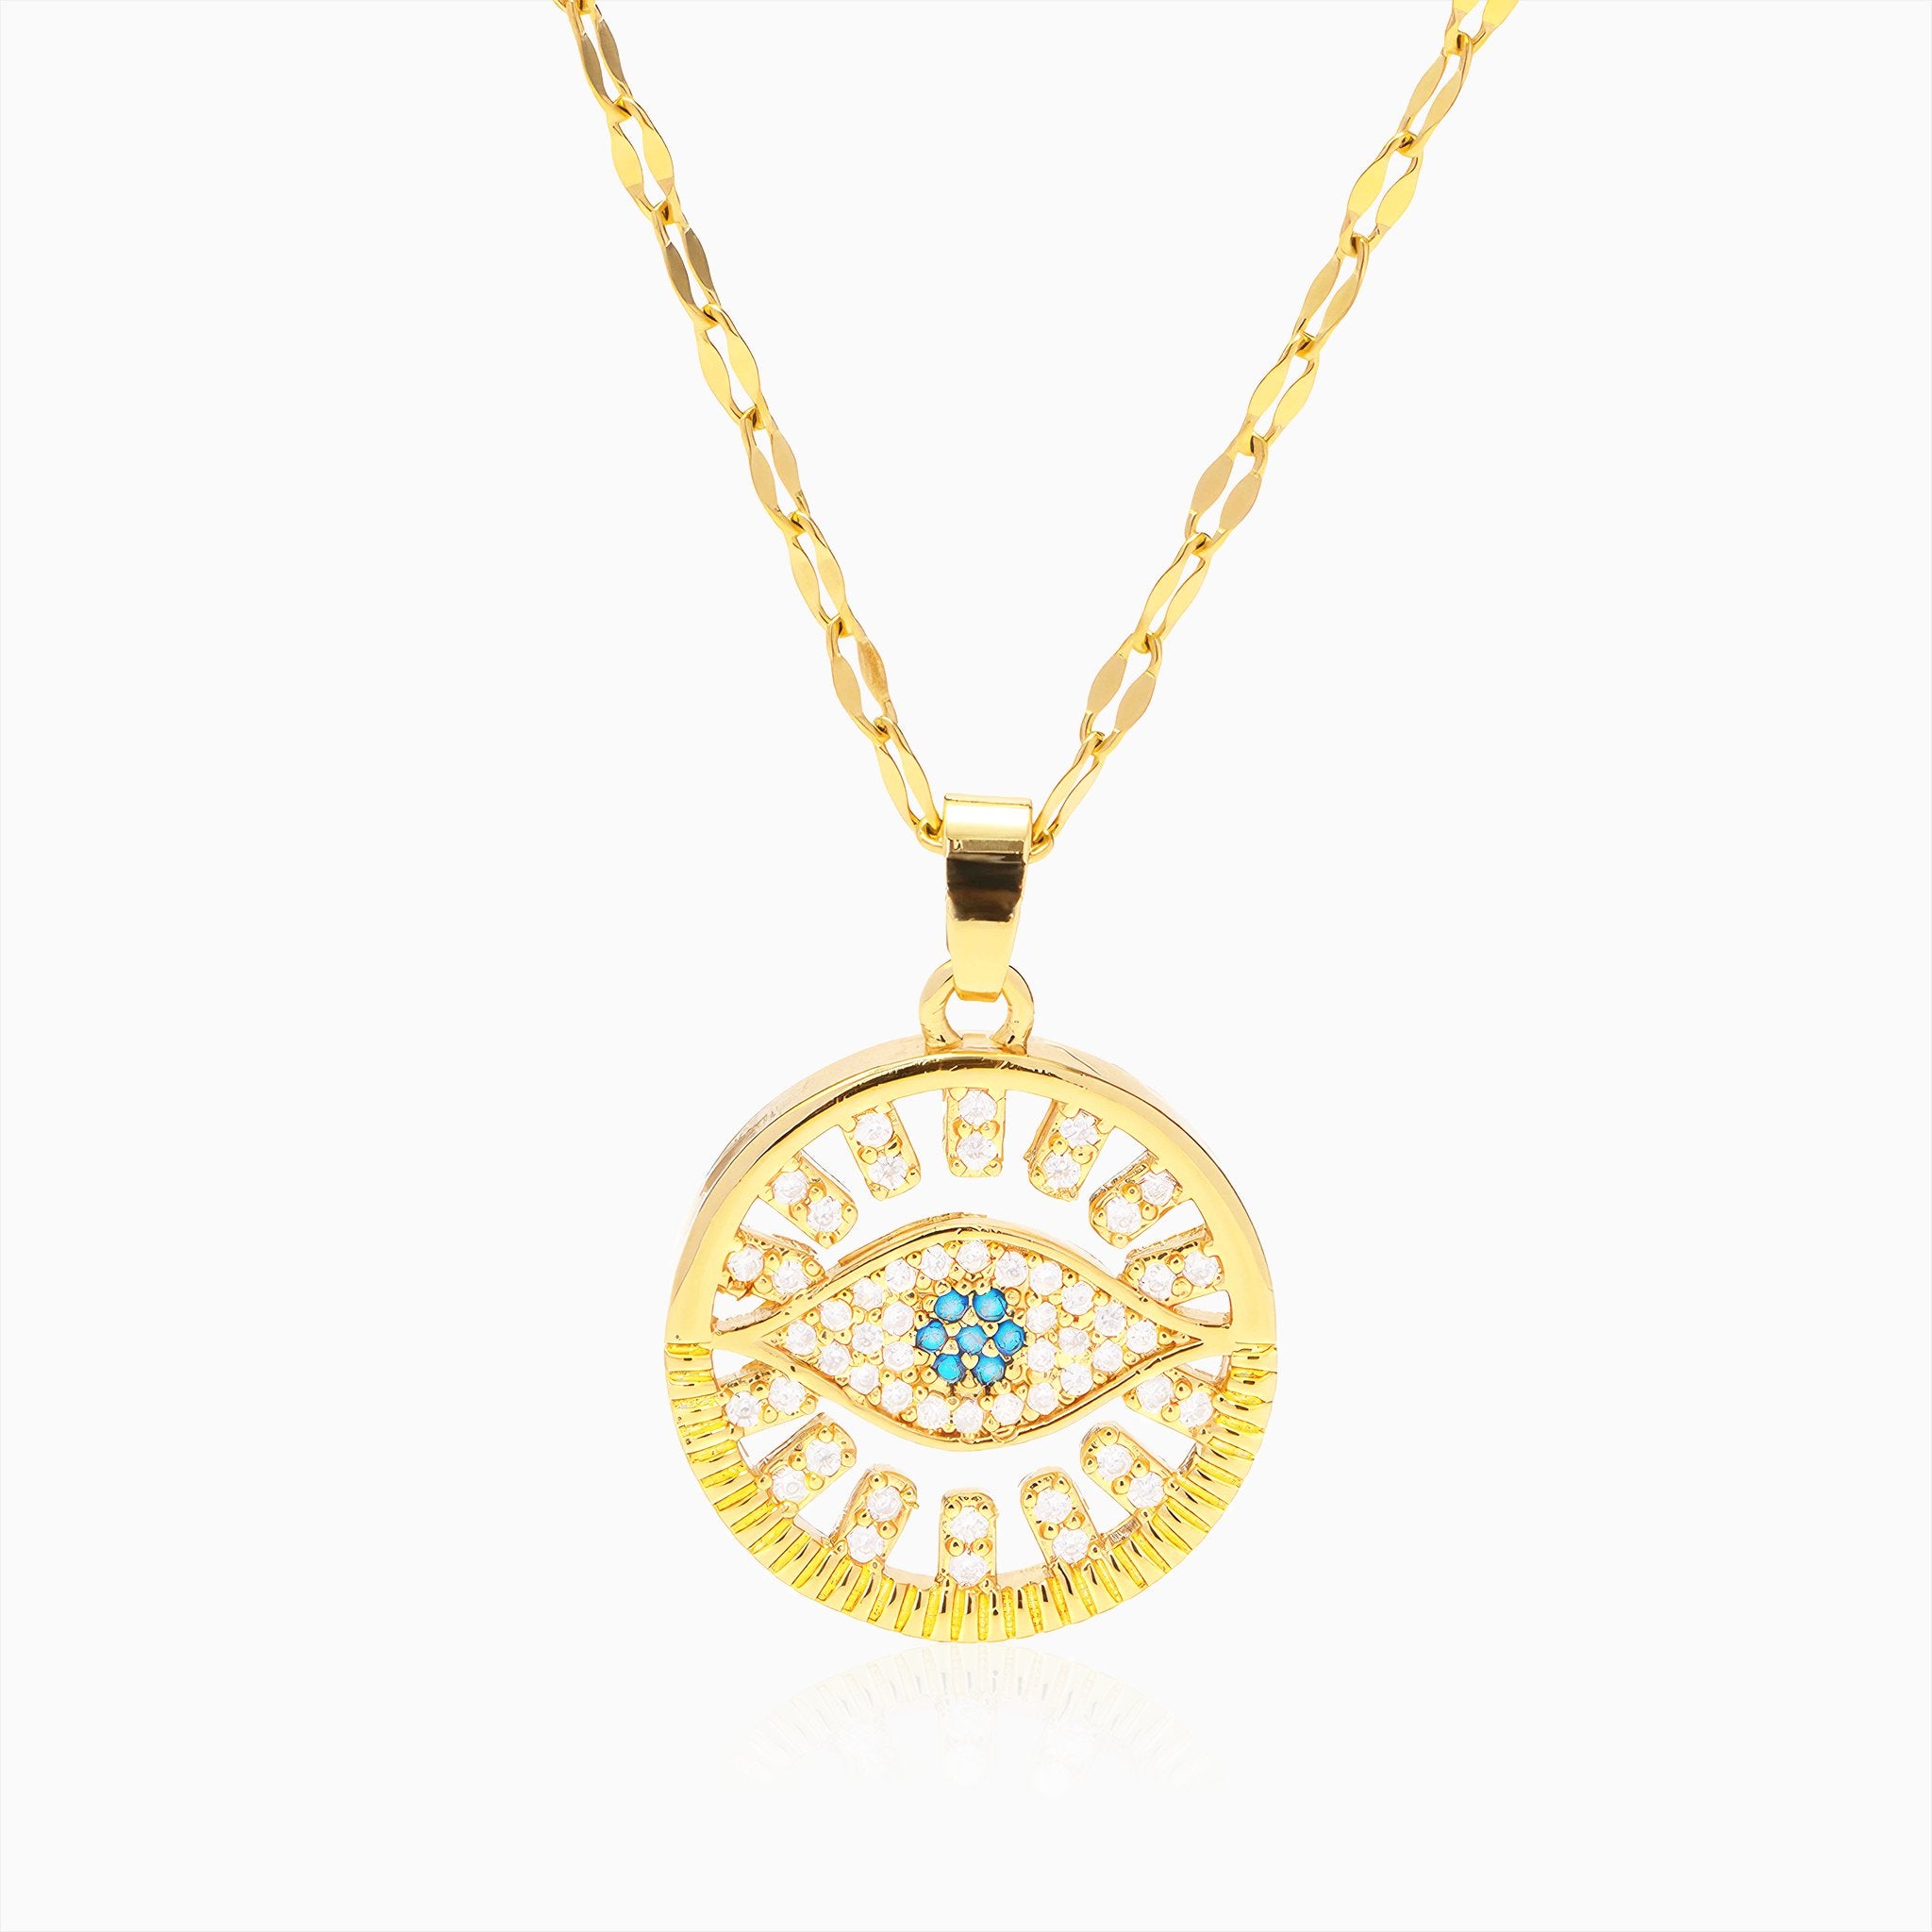 Holy Eye Design Pendant Necklace - Nobbier - Necklace - 18K Gold And Titanium PVD Coated Jewelry